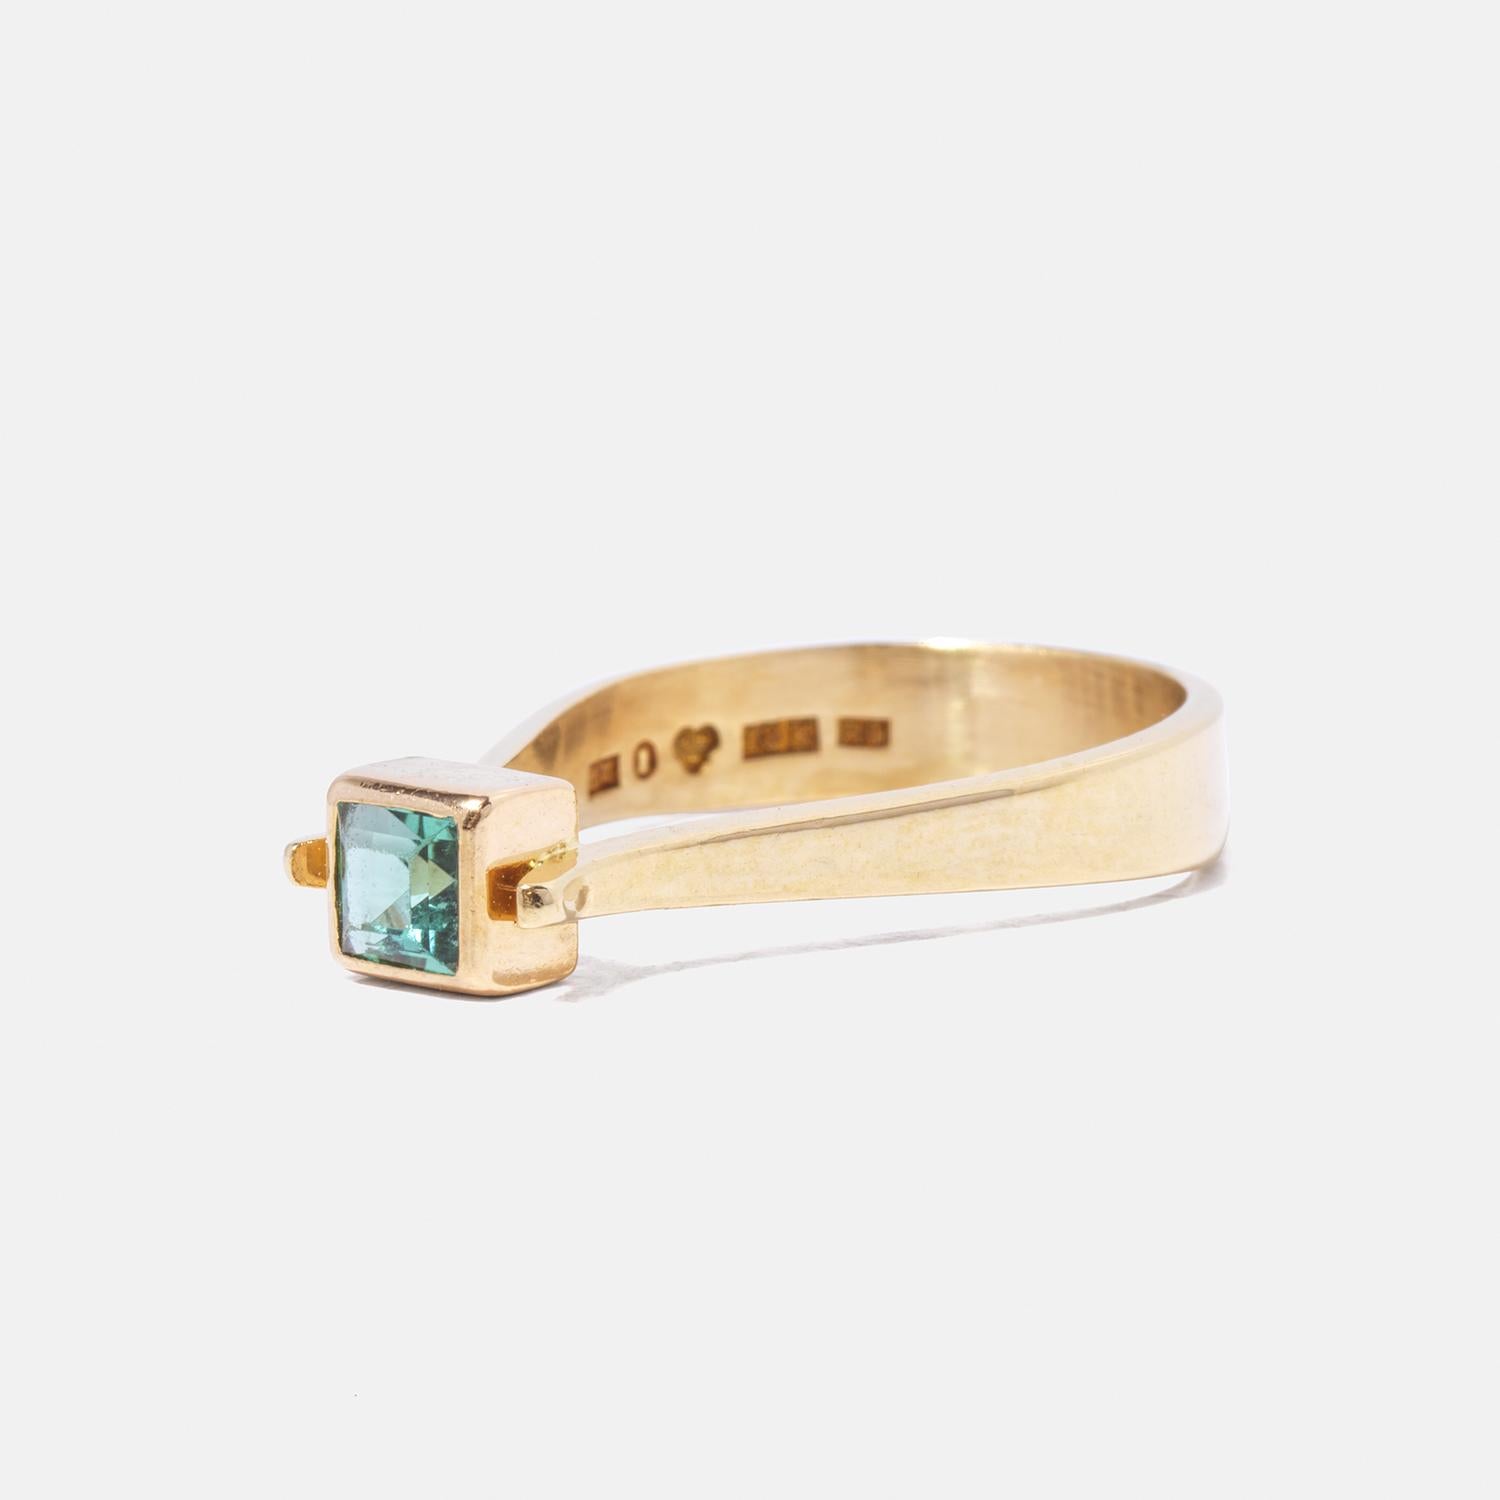 Vintage 18k Gold and Tourmaline Ring by Rey Urban Made Year 1967 In Good Condition For Sale In Stockholm, SE